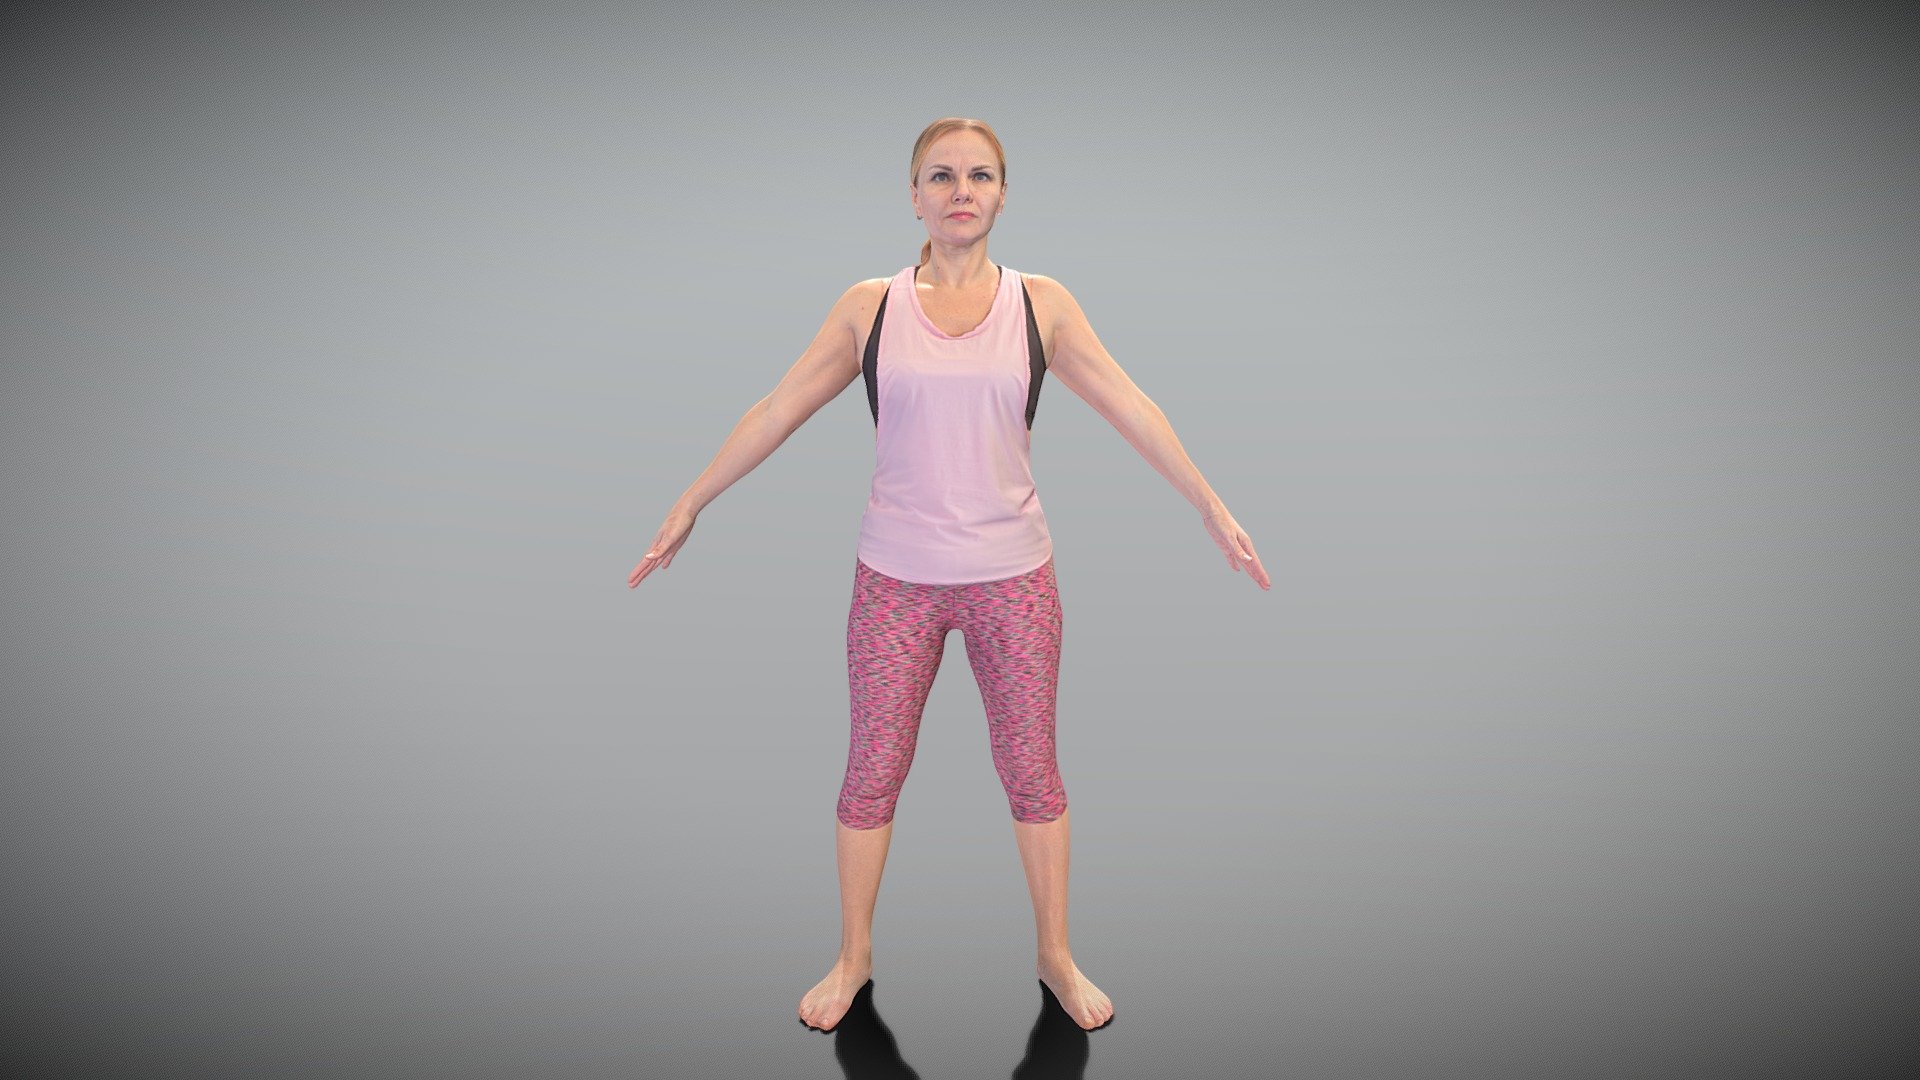 This is a true human size detailed model of a beautiful young woman of Caucasian appearance dressed in sportswear. The model is captured in the A-pose with mesh ready for rigging and animation in all most usable 3d software.

Technical specifications:




digital double scan model

low-poly model

high-poly model (.ztl tool with 5-6 subdivisions) clean and retopologized automatically via ZRemesher

fully quad topology

sufficiently clean

edge Loops based

ready for subdivision

8K texture color map

non-overlapping UV map

ready for animation

PBR textures 8K resolution: Normal, Displacement, Albedo maps

Download package includes a Cinema 4D project file with Redshift shader, OBJ, FBX, STL files, which are applicable for 3ds Max, Maya, Unreal Engine, Unity, Blender, etc. All the textures you will find in the “Tex” folder, included into the main archive.

3D EVERYTHING

Stand with Ukraine! - Woman in pink fitness suit in A-pose 407 - Buy Royalty Free 3D model by deep3dstudio 3d model